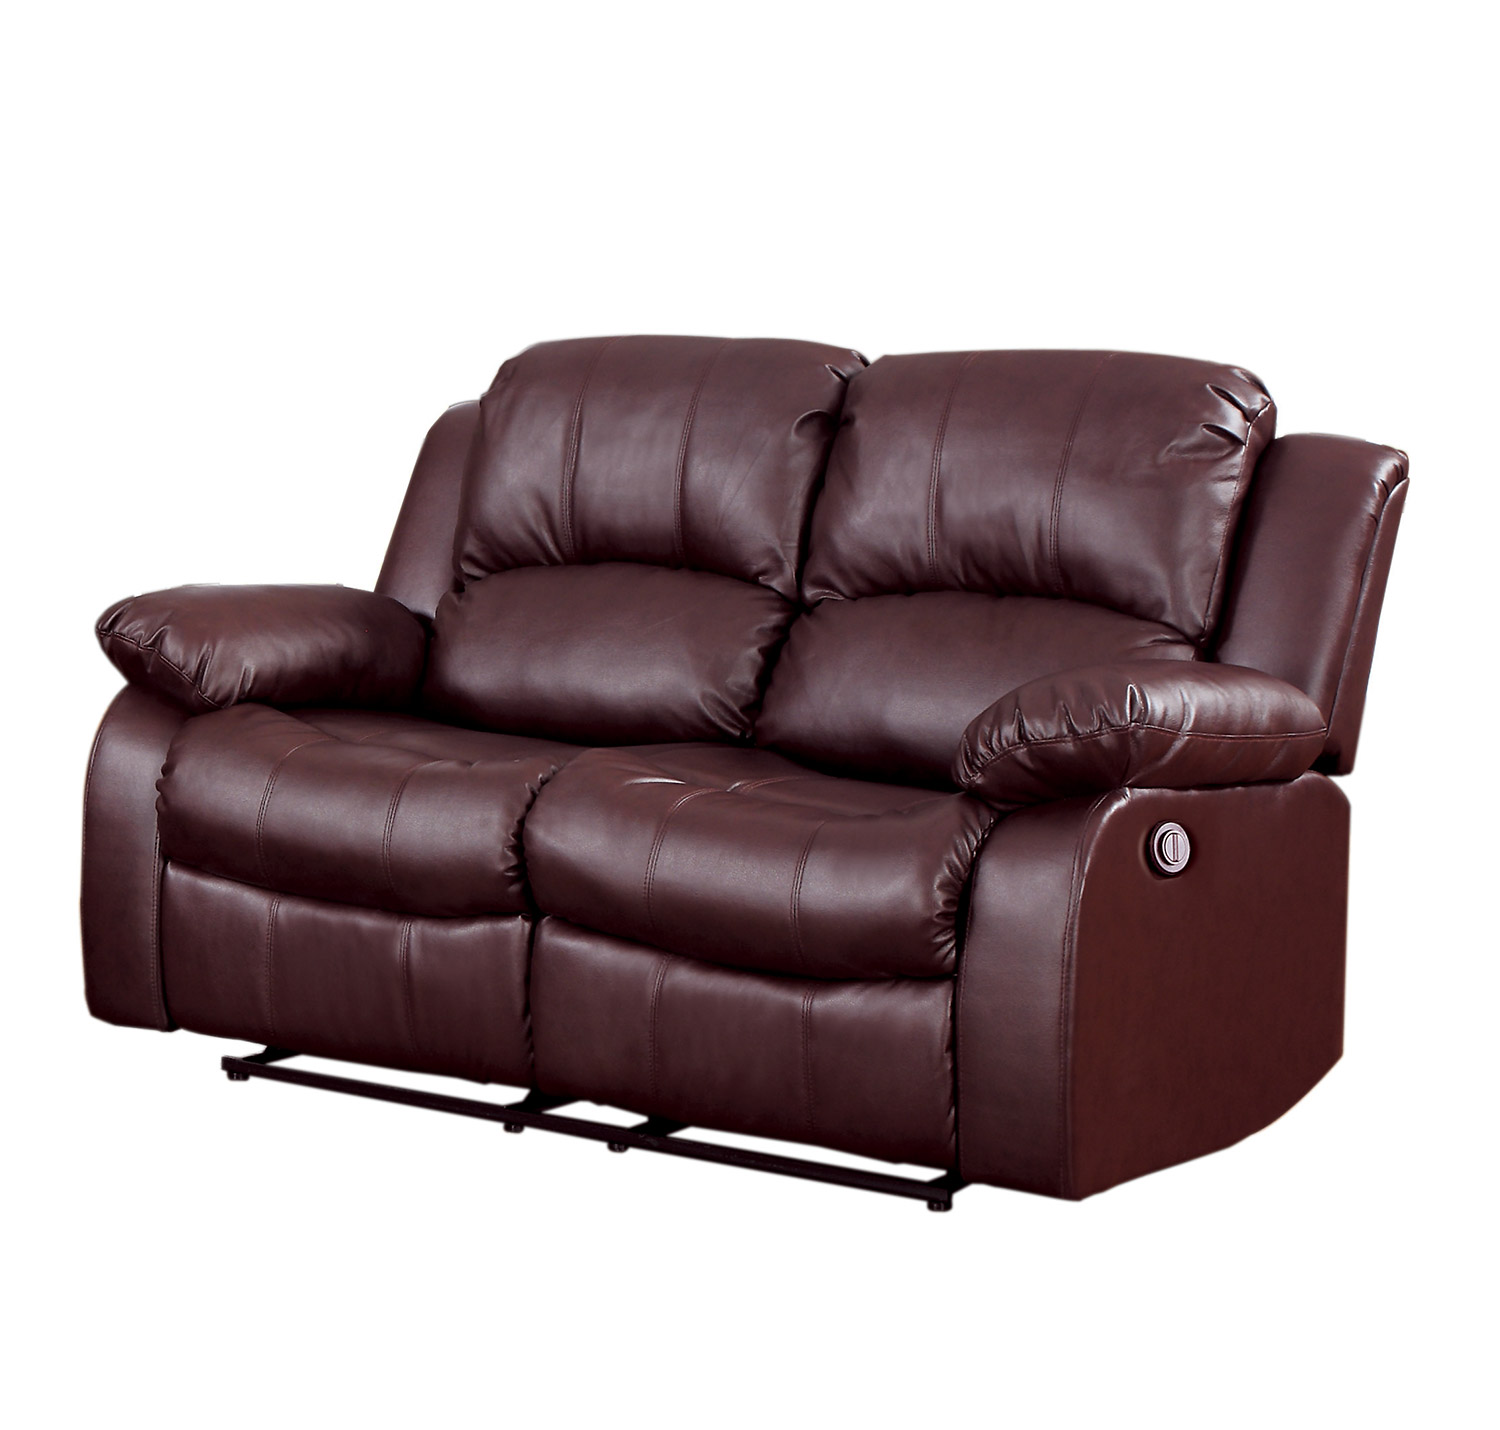 Homelegance Cranley Power Double Reclining Love Seat - Brown